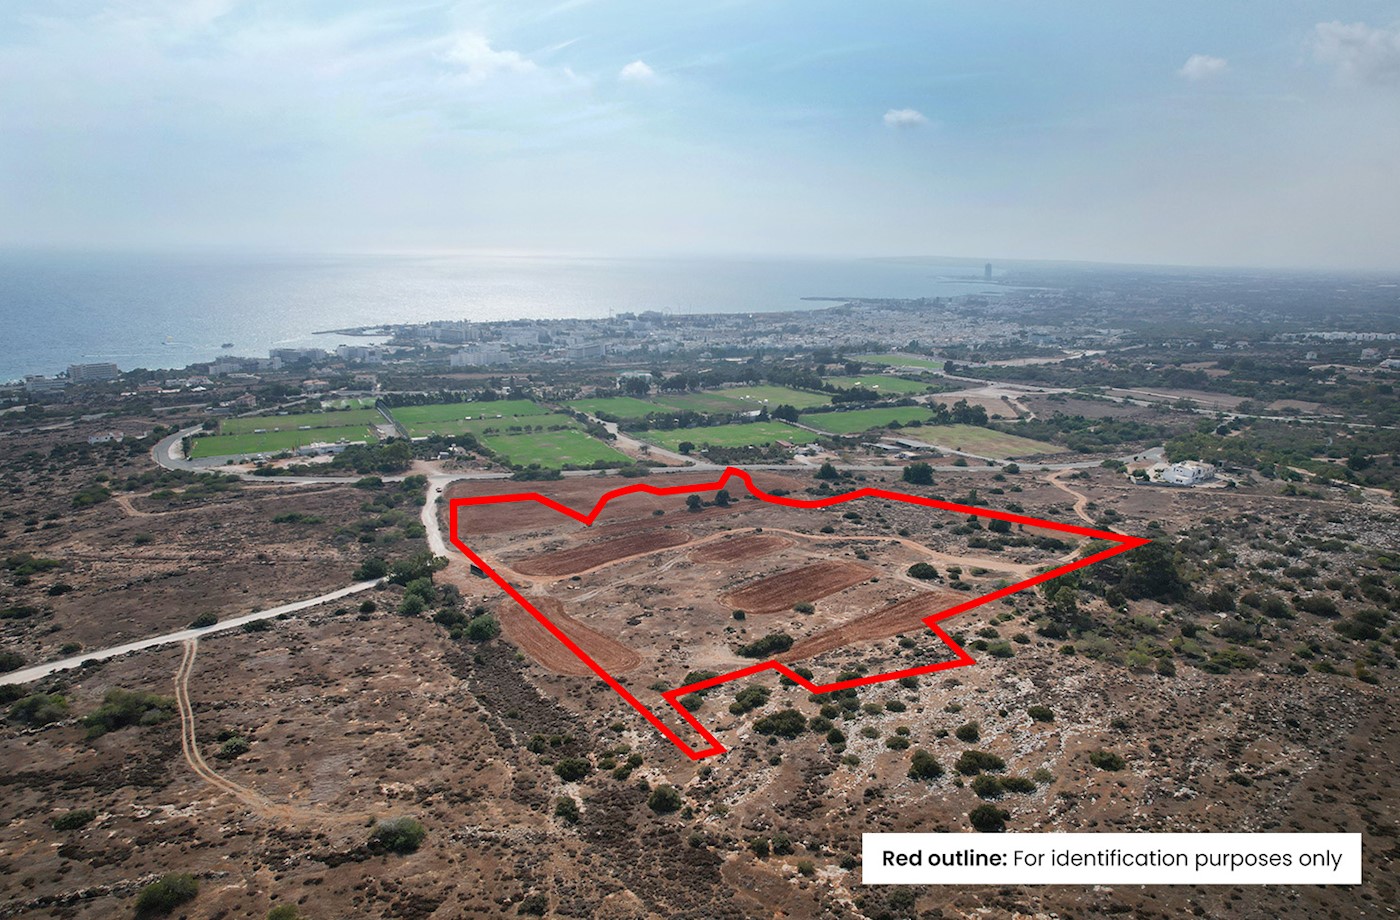 Share of residential field in Ayia Napa, Famagusta 1/2